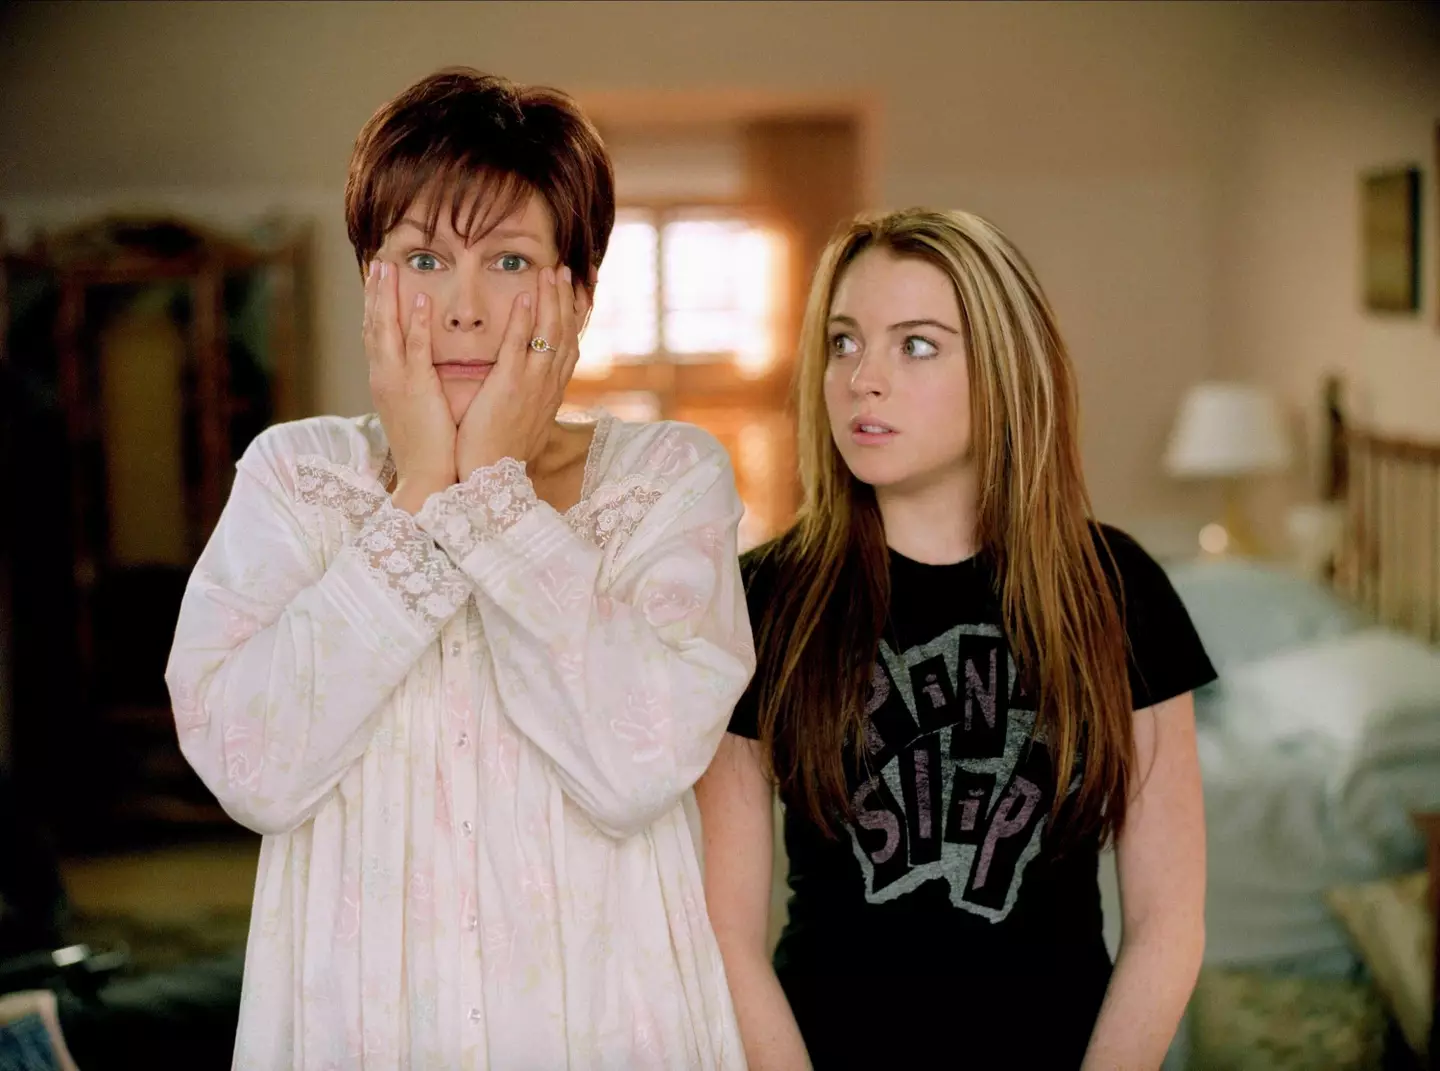 It's been 20 years since Curtis and Lohan starred in Freaky Friday.